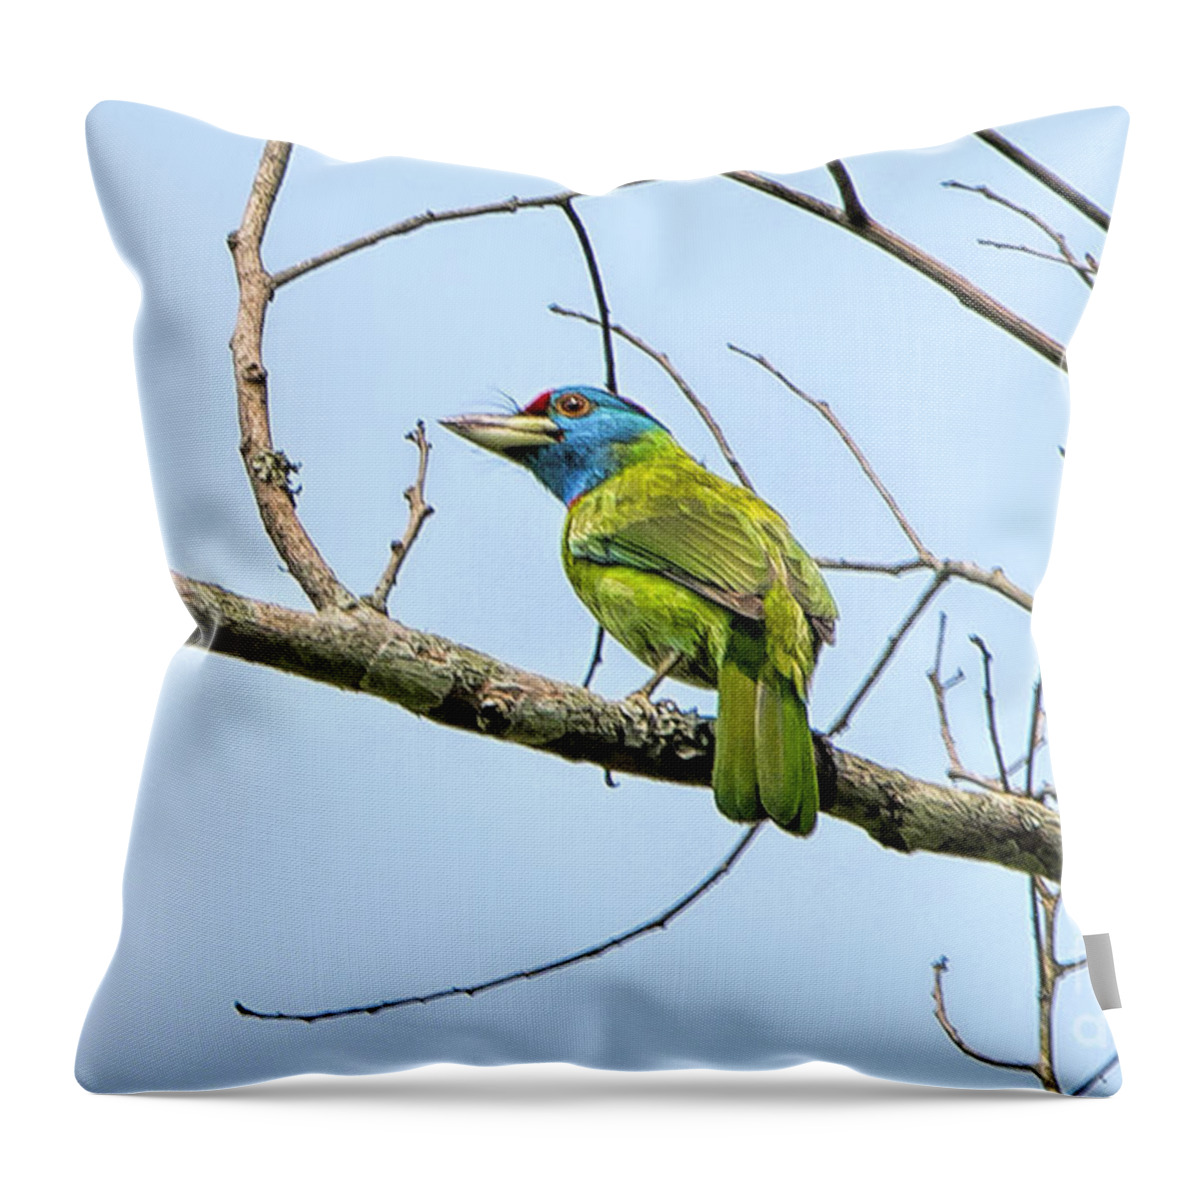 Bird Throw Pillow featuring the photograph Blue Throated Barbet by Pravine Chester